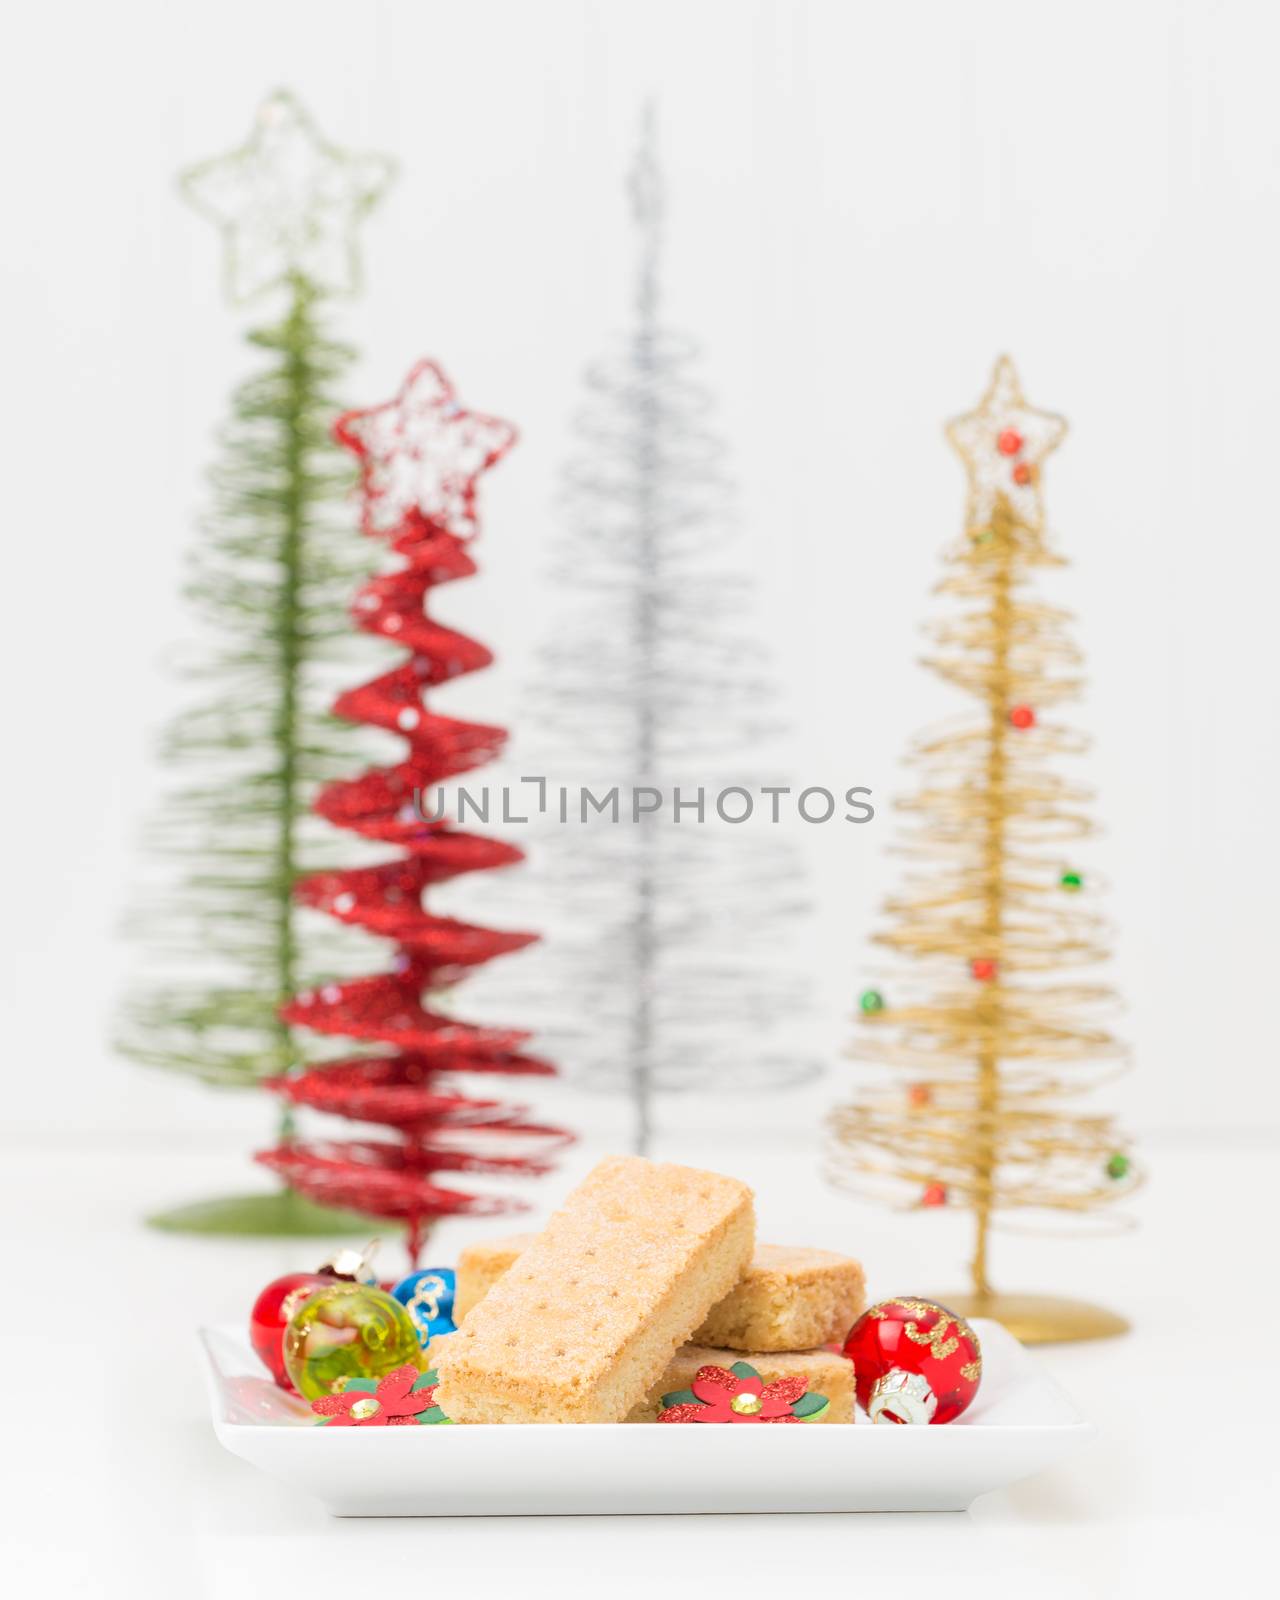 Plate of traditional festive shortbread cookies with christmas trees in the background.